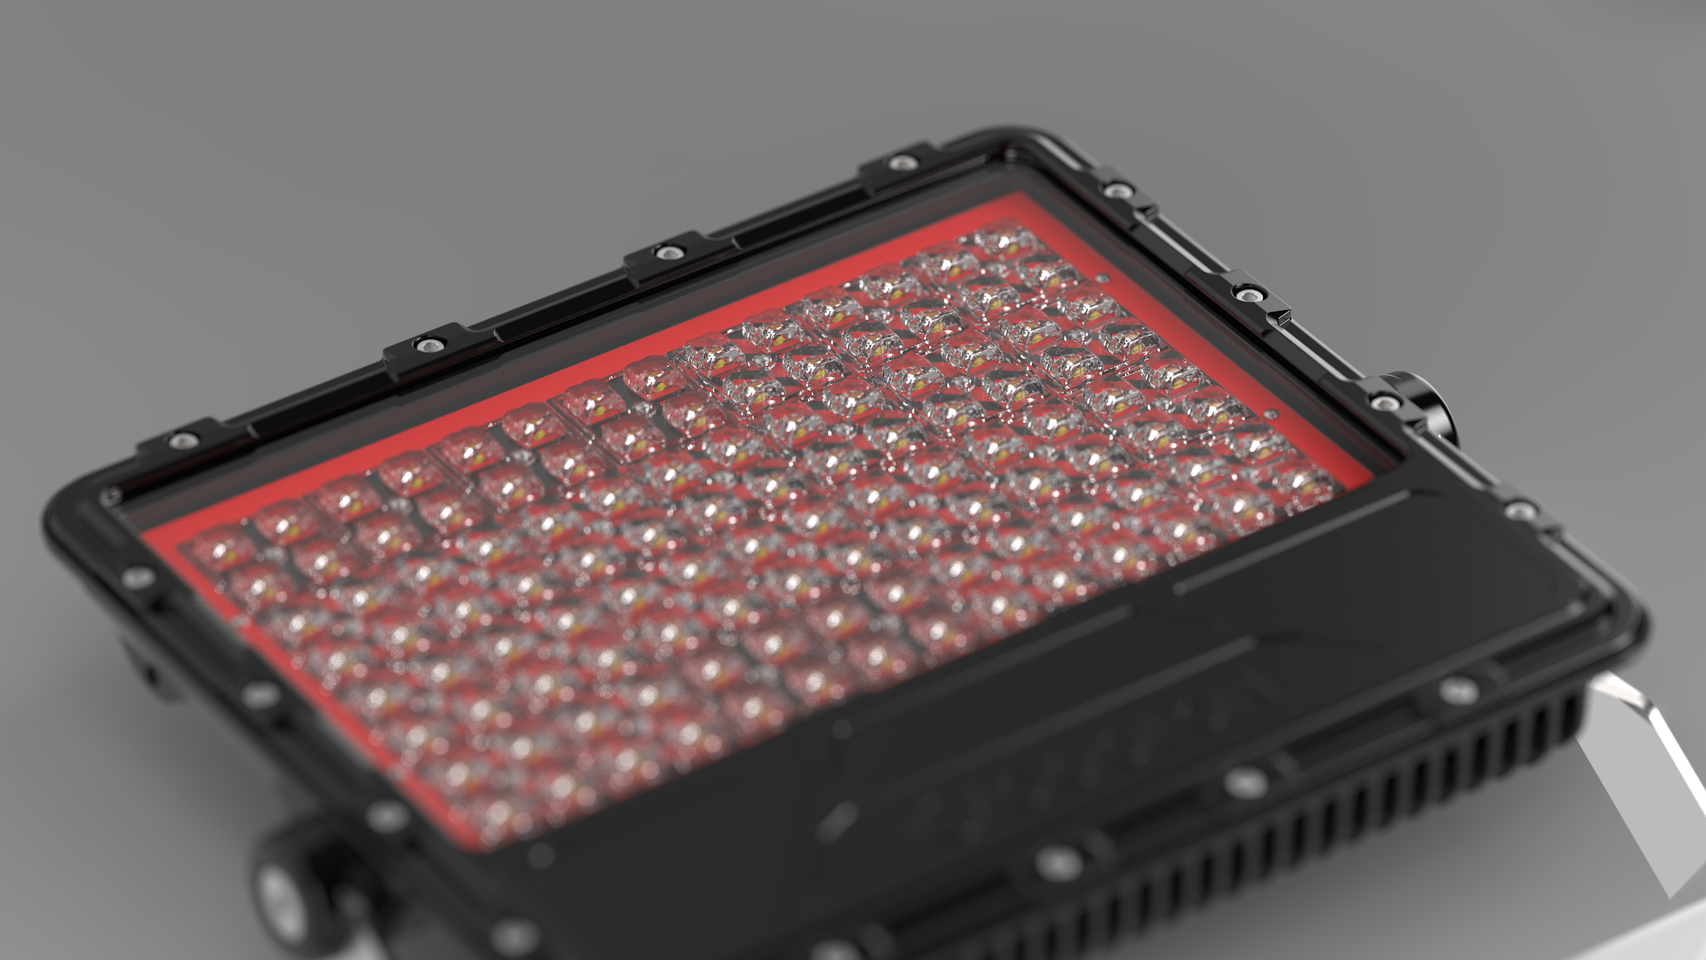 Close up photo of Cassidy LED Flood Light, individual high quality optics are clearly visible